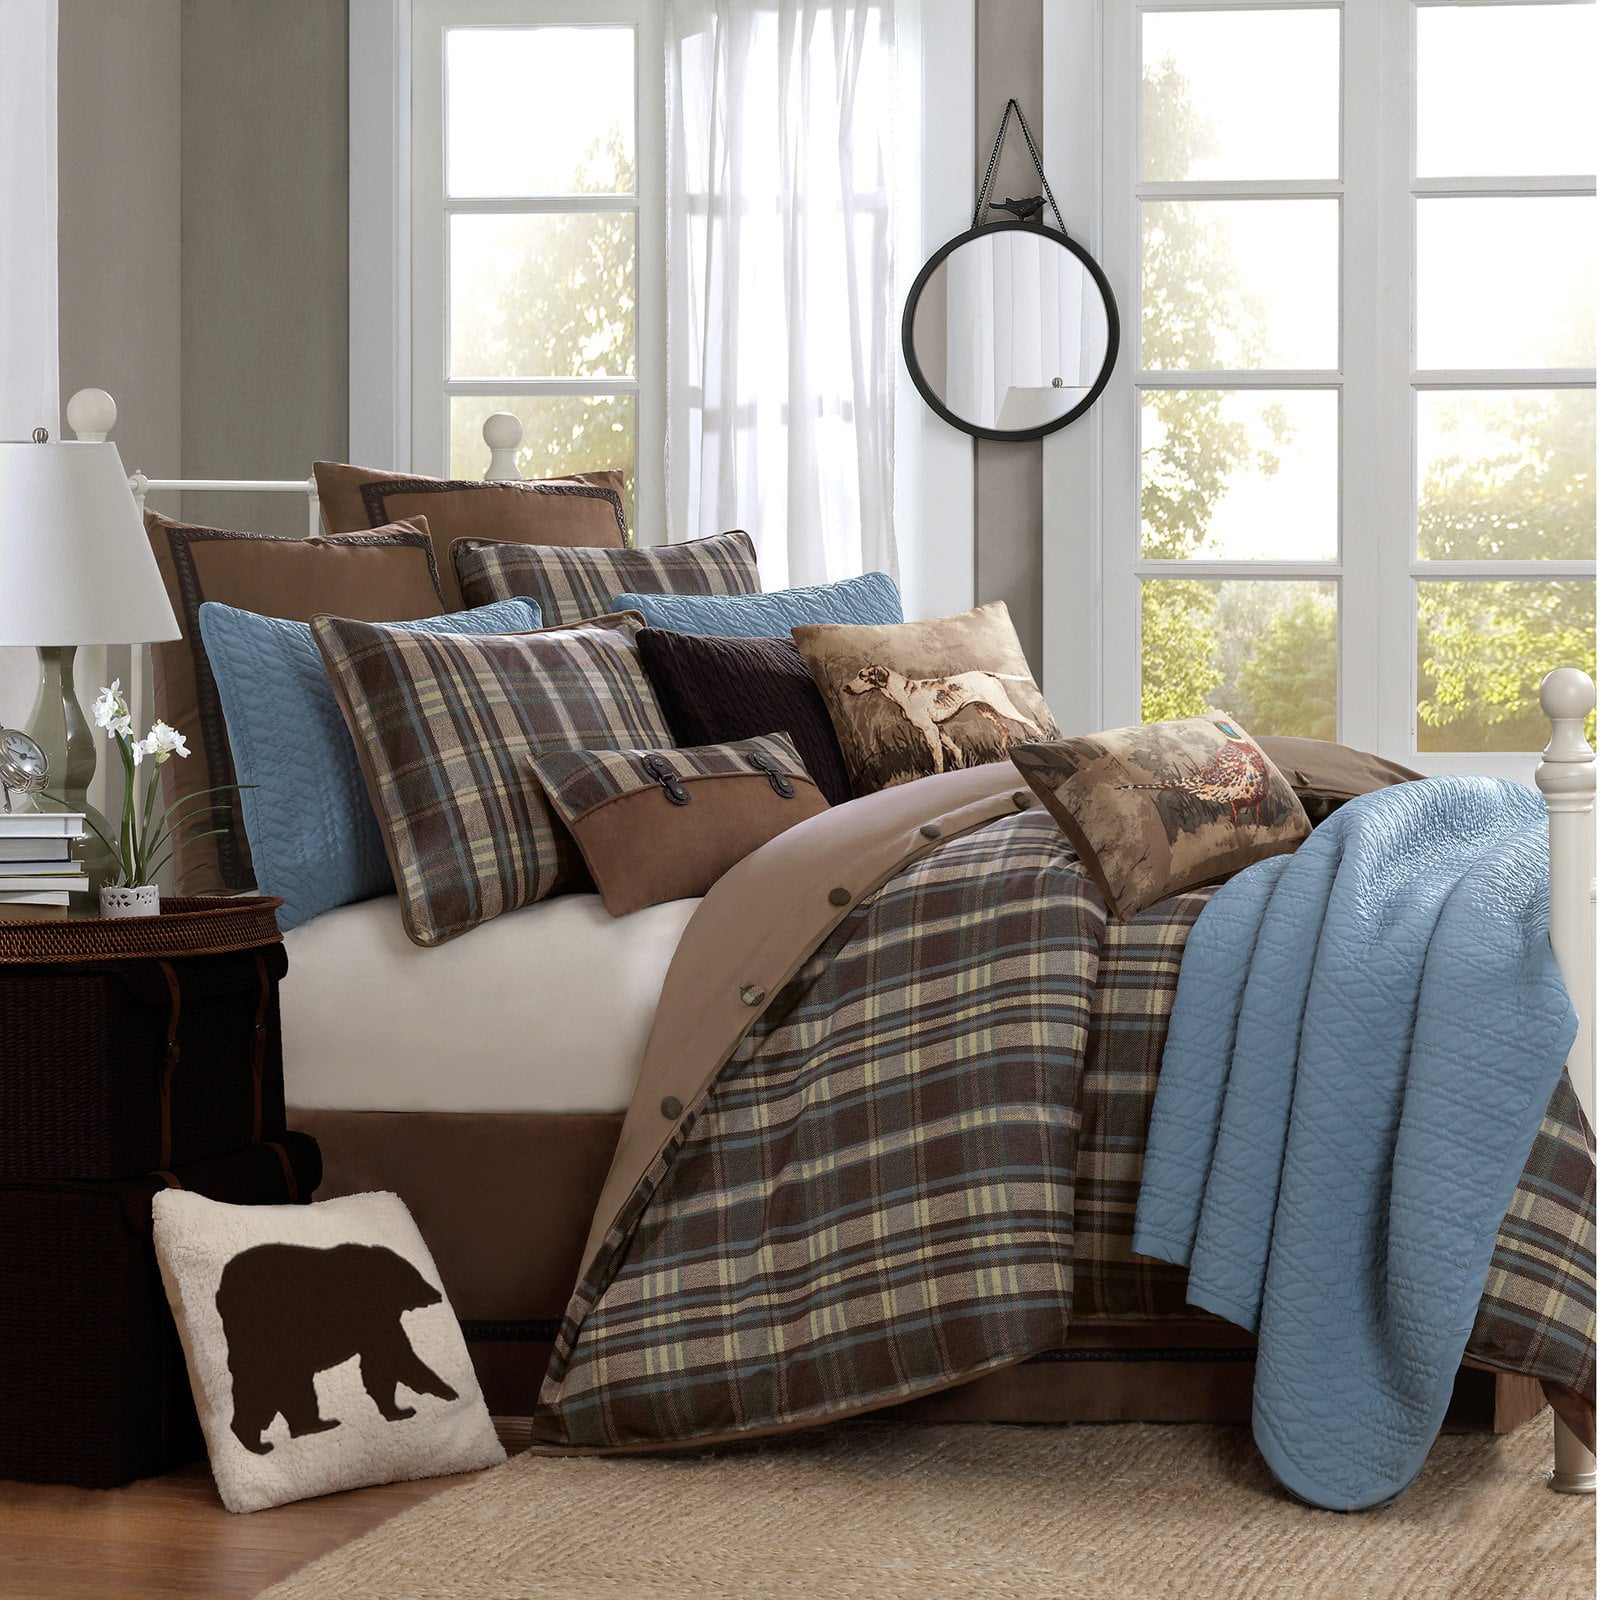 Hadley Plaid Comforter Set By Woolrich, Woolrich King Bedding